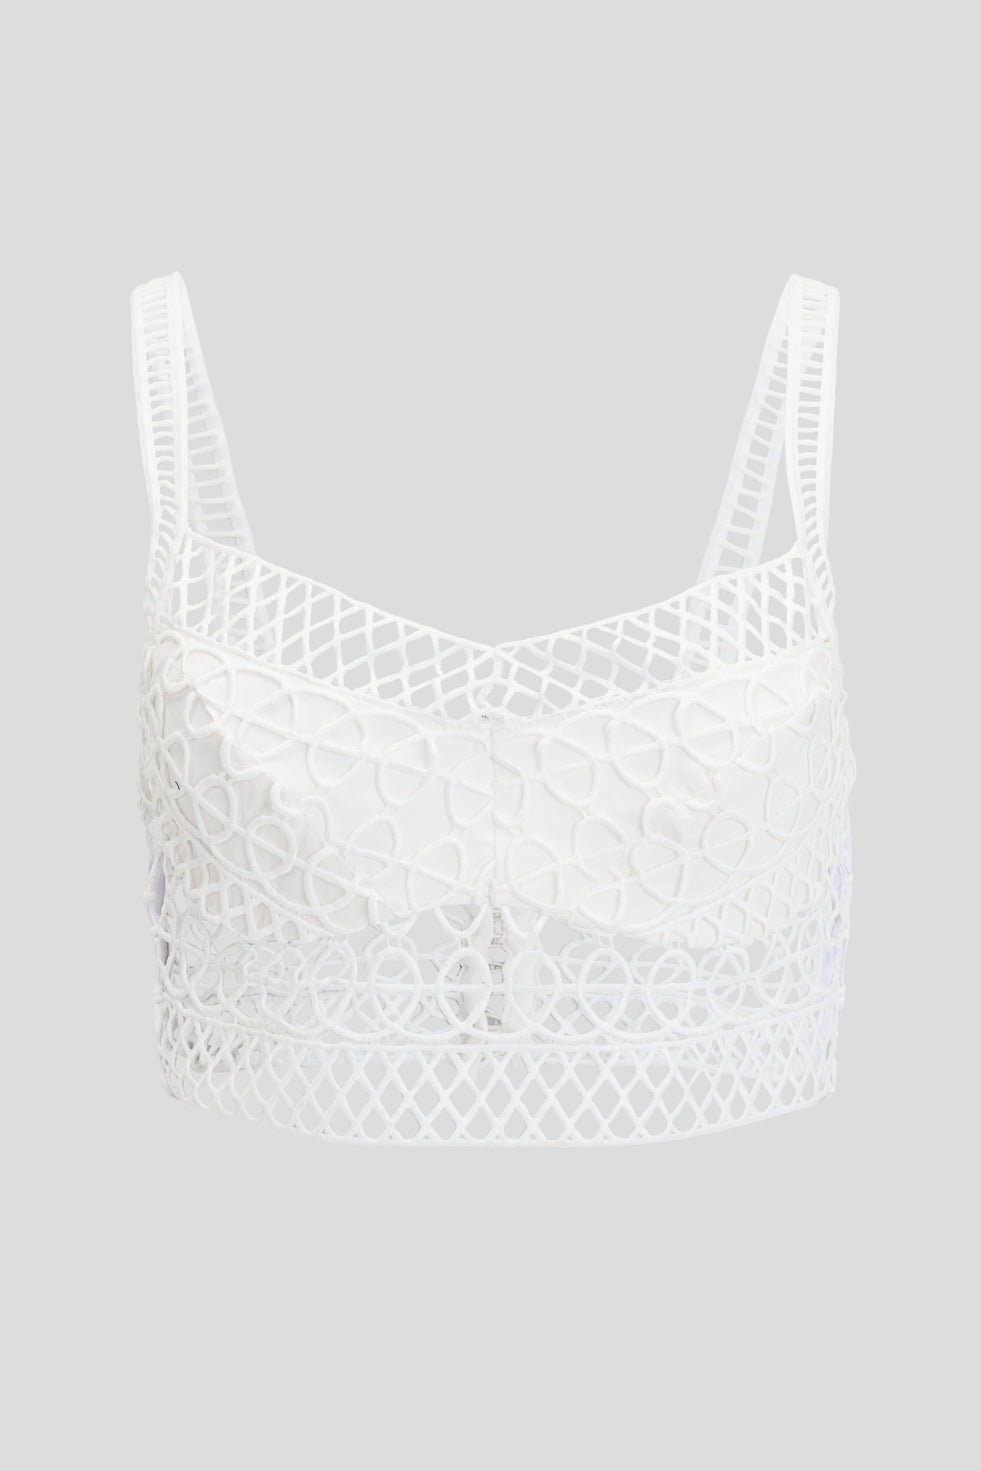 Rima White Cotton blend embroided bustier top